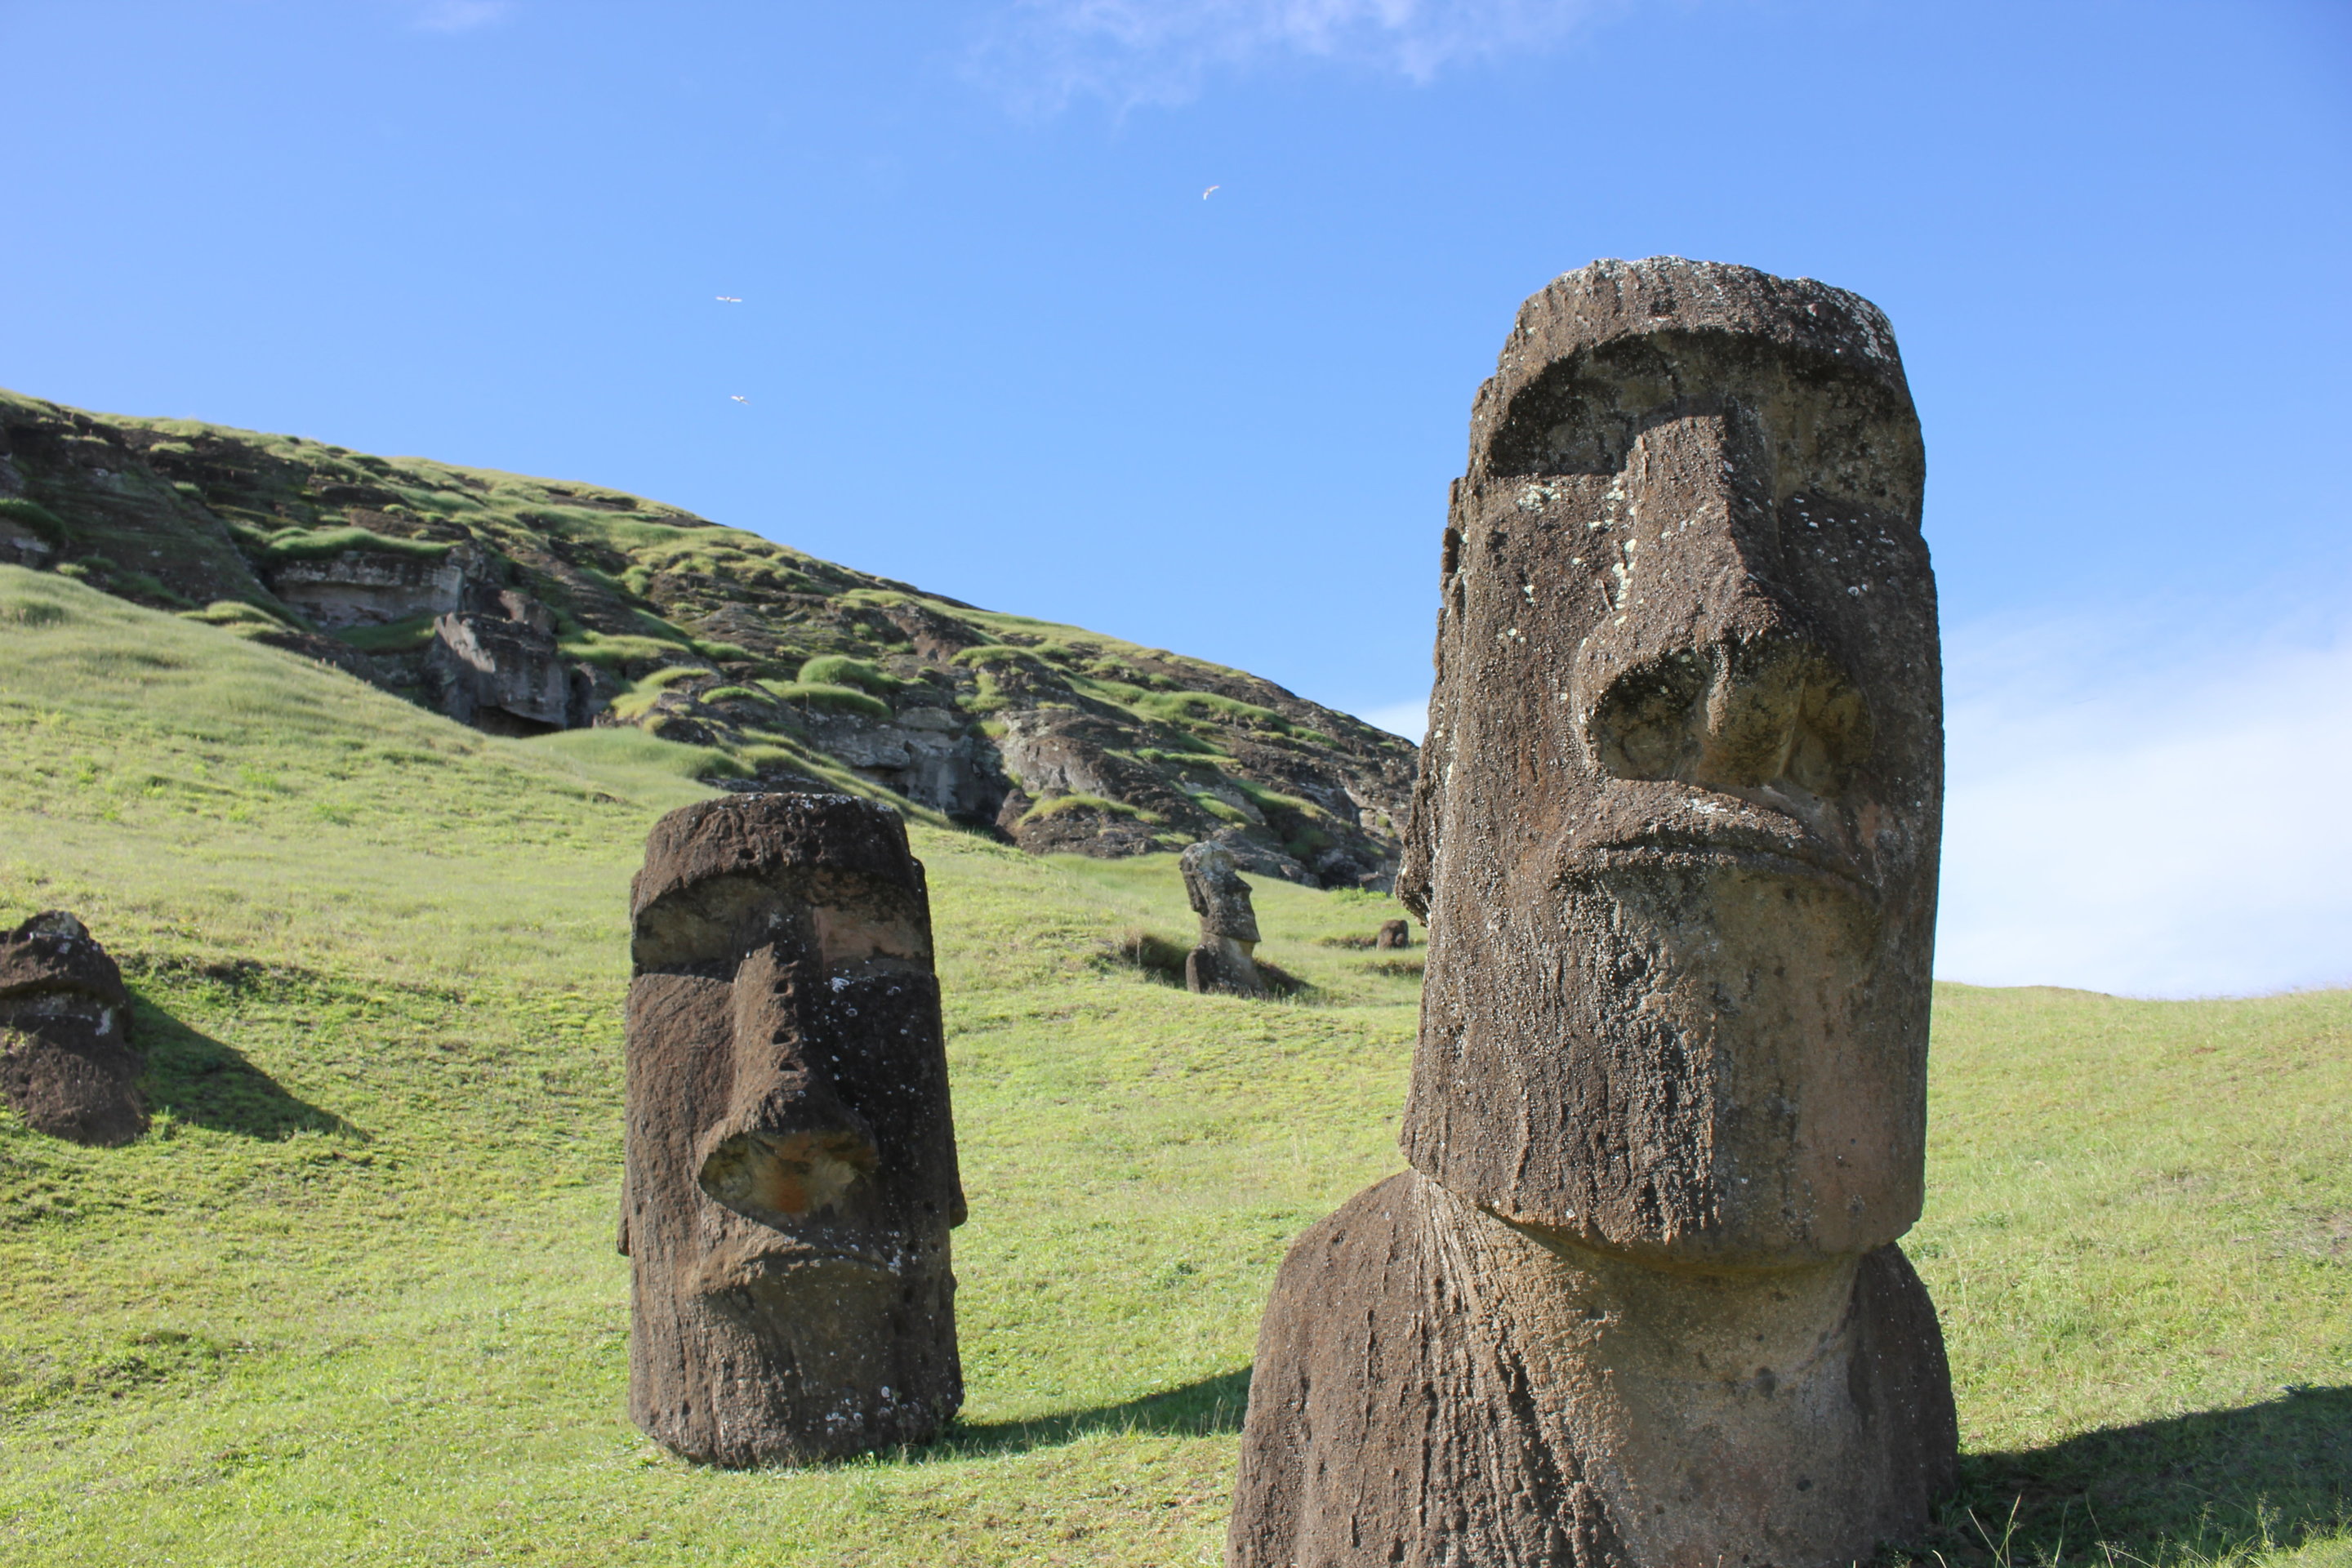 Examples of the Easter Island statues, or moai. Credit: Dale Simpson, Jr.